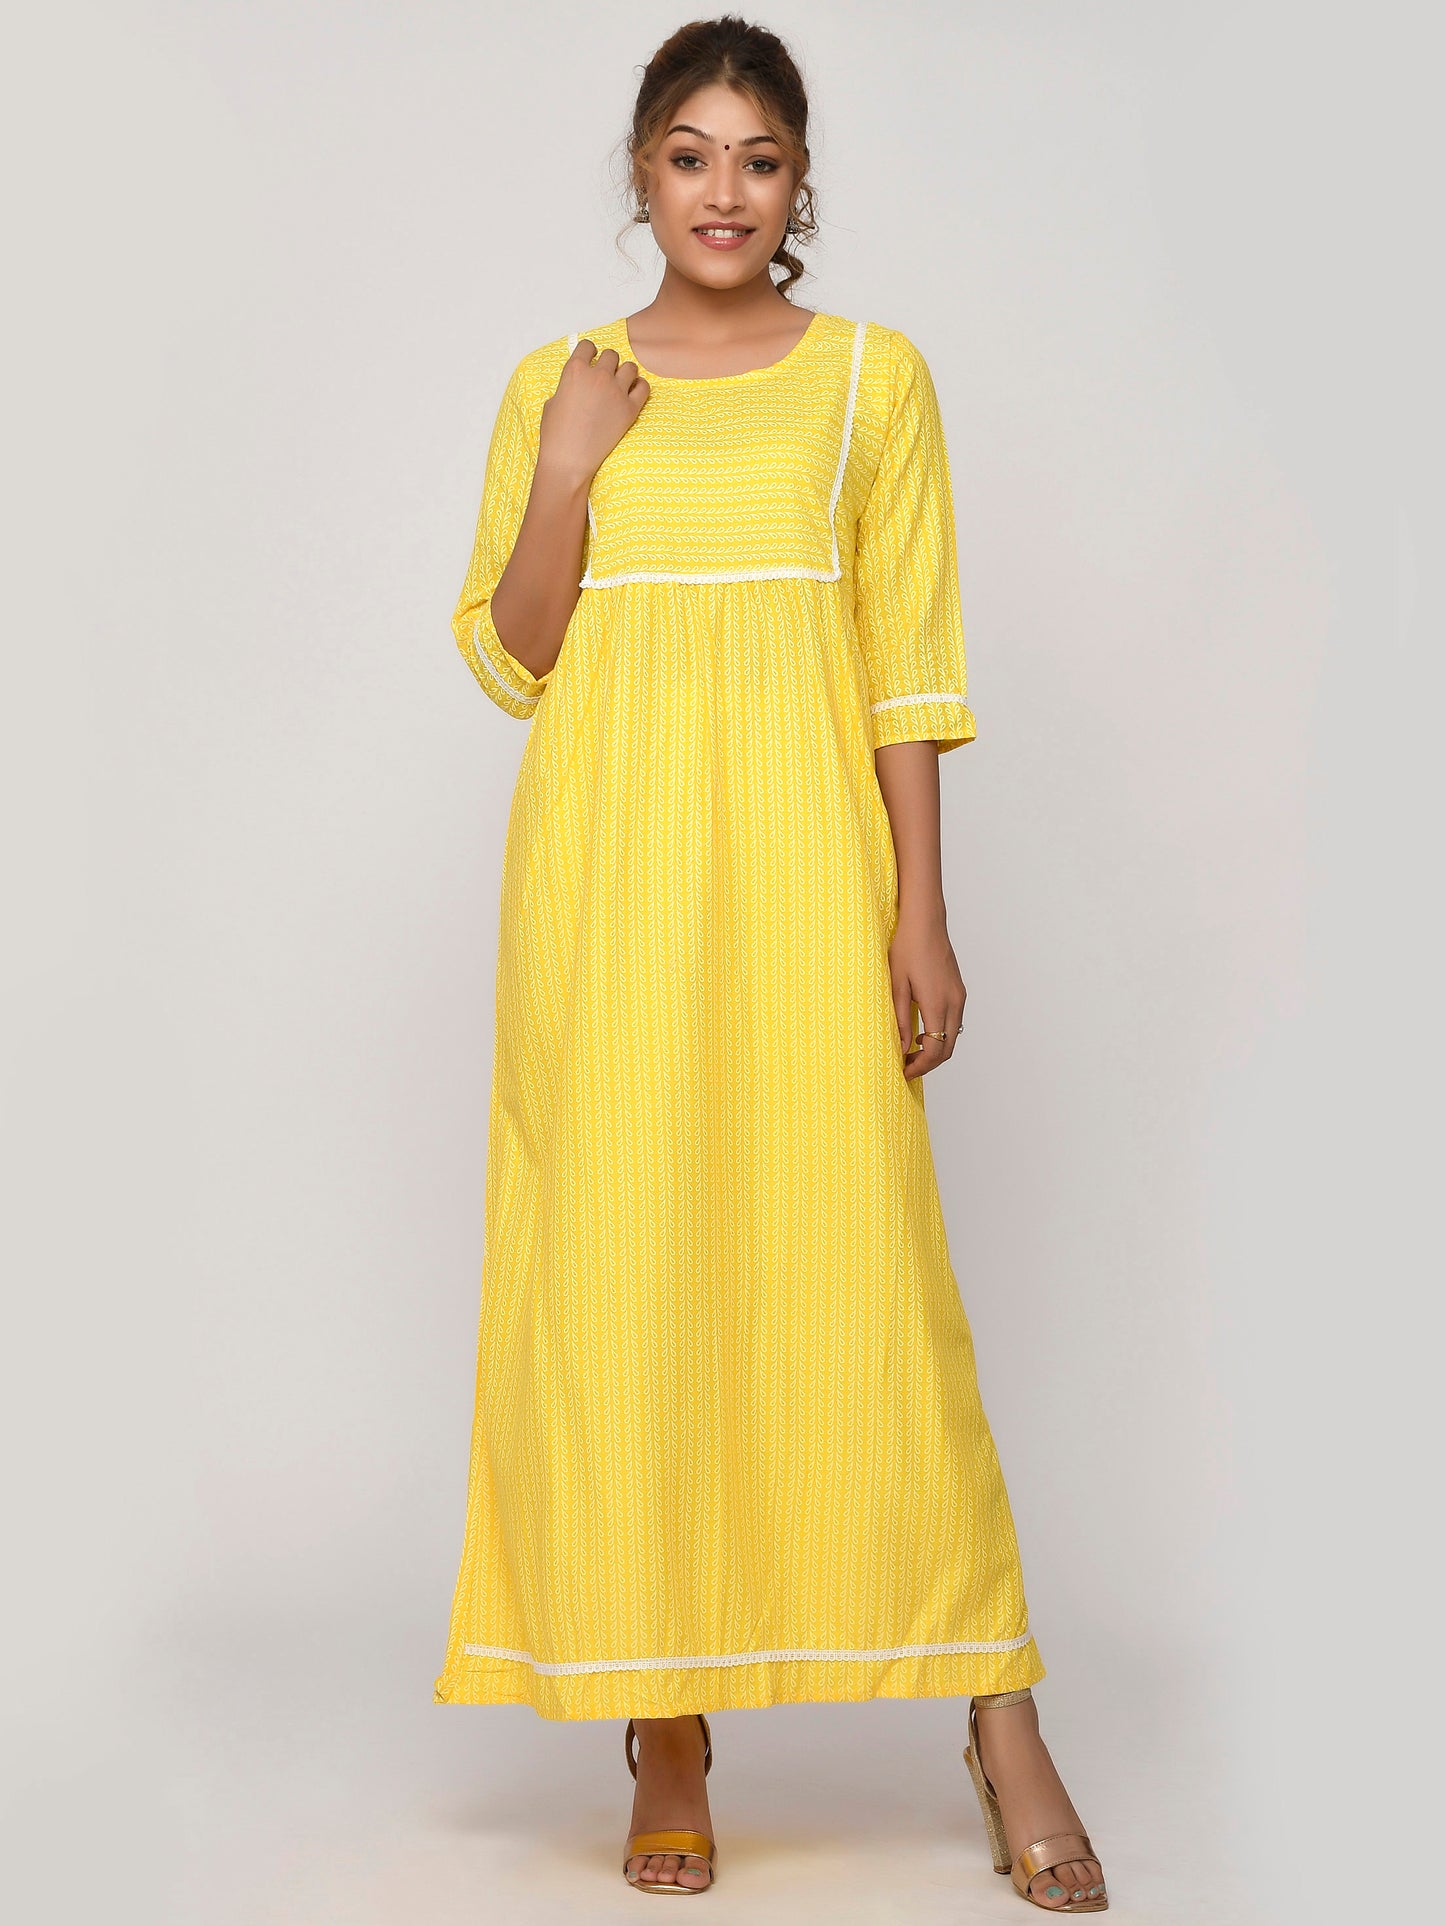 Yellow and White Colored Printed Kurta With Trouser.